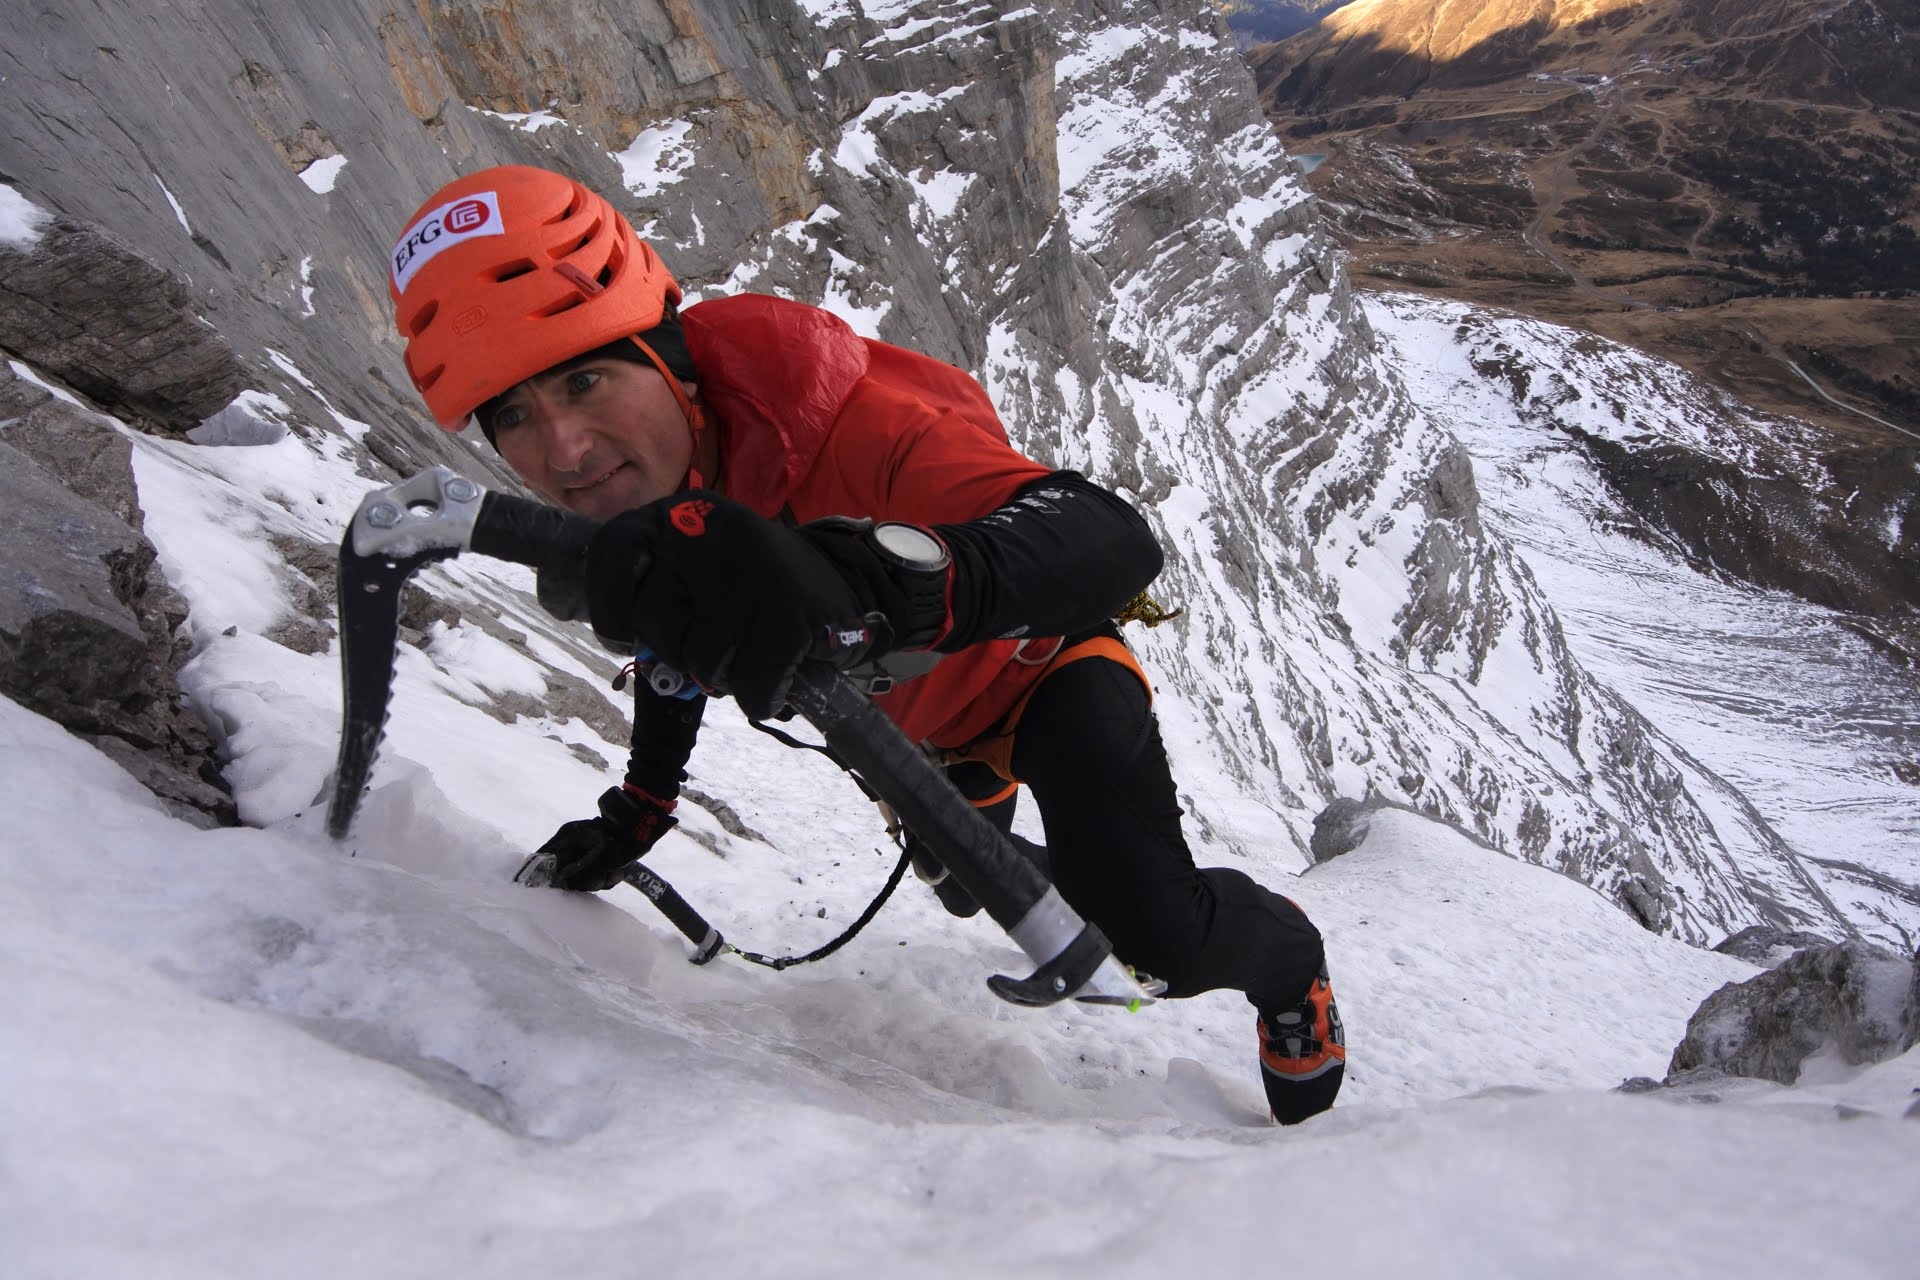 Reknowned Swiss Mountaineer Ueli Steck Fell To his Death Near Mount Everest